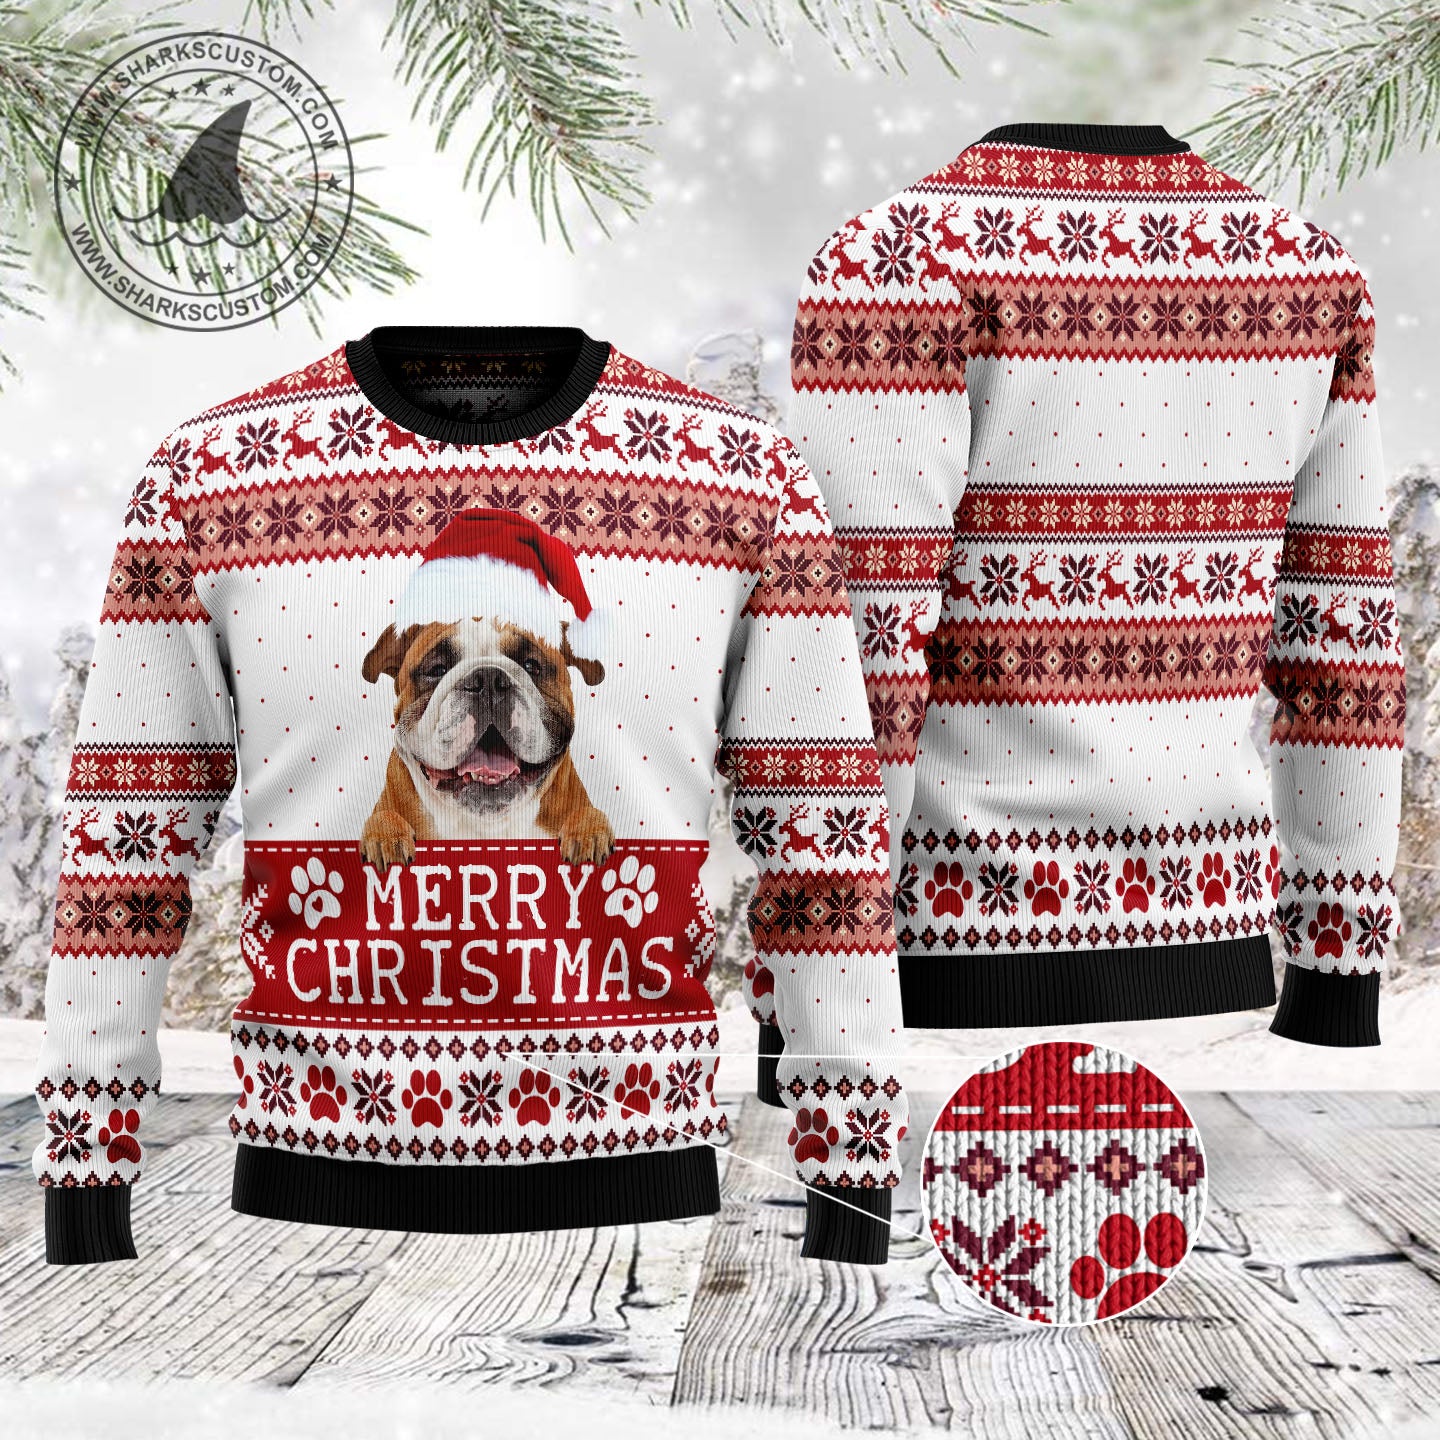 Merry Christmas Bulldog TG5129 - Ugly Christmas Sweater unisex womens & mens, couples matching, friends, dog lover, funny family sweater gifts (plus size available)